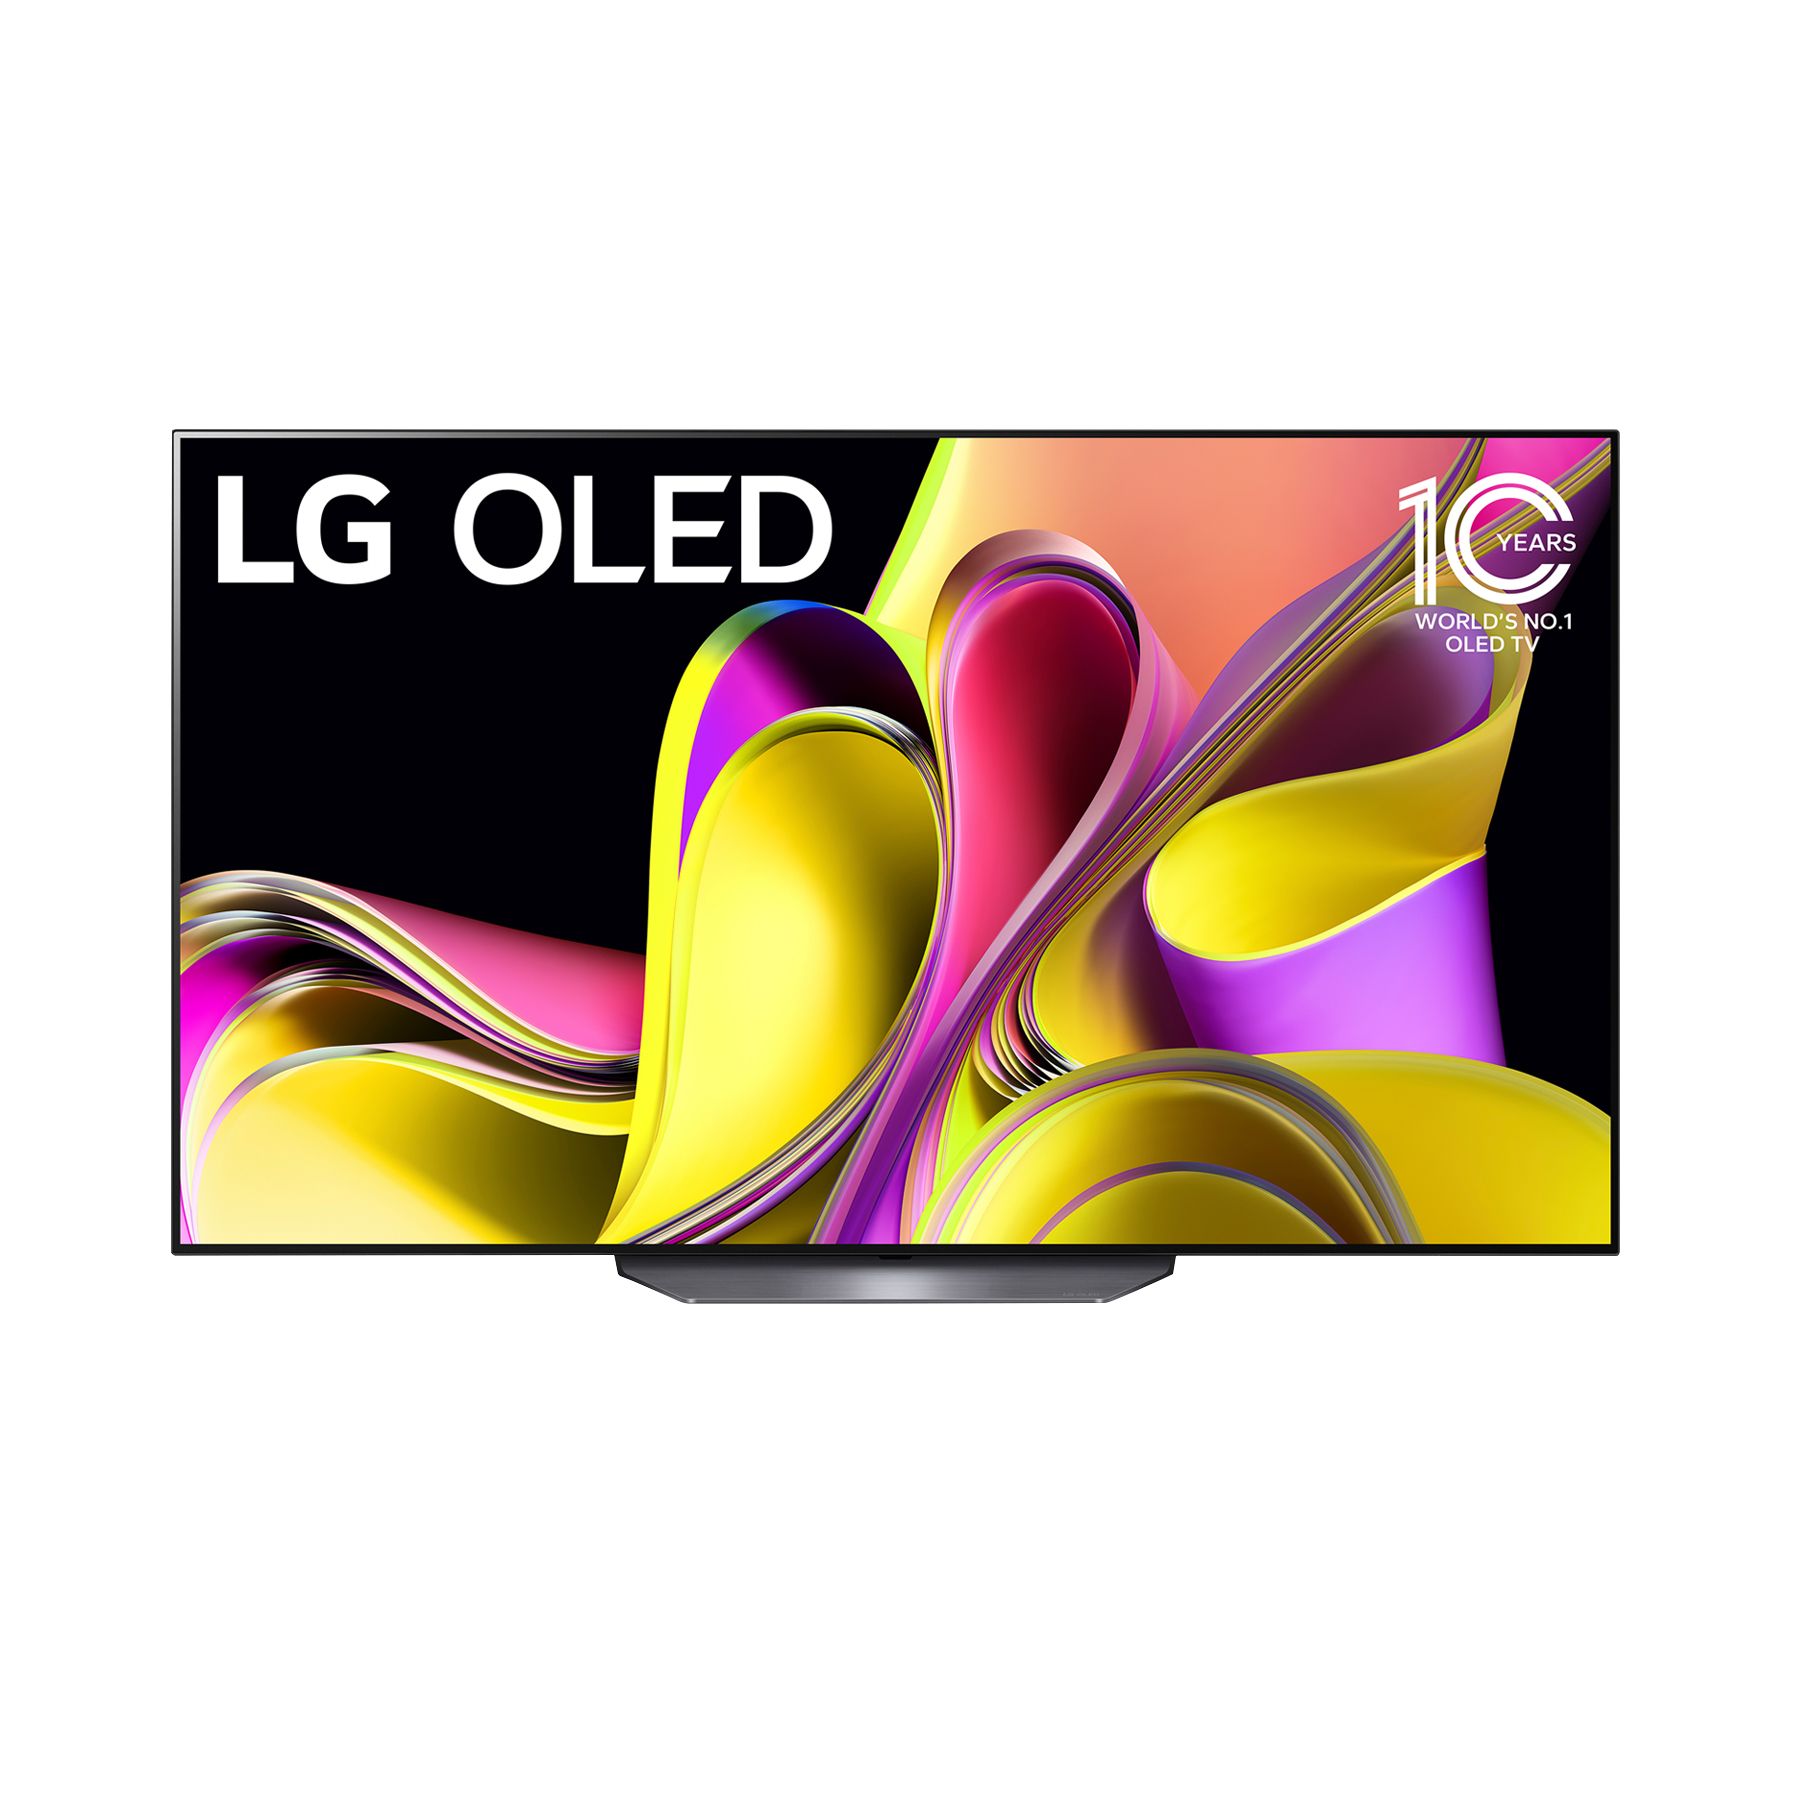 LG 27 in StanbyME LED Full HD Touch Screen Smart TV - 27ART10AKPL 